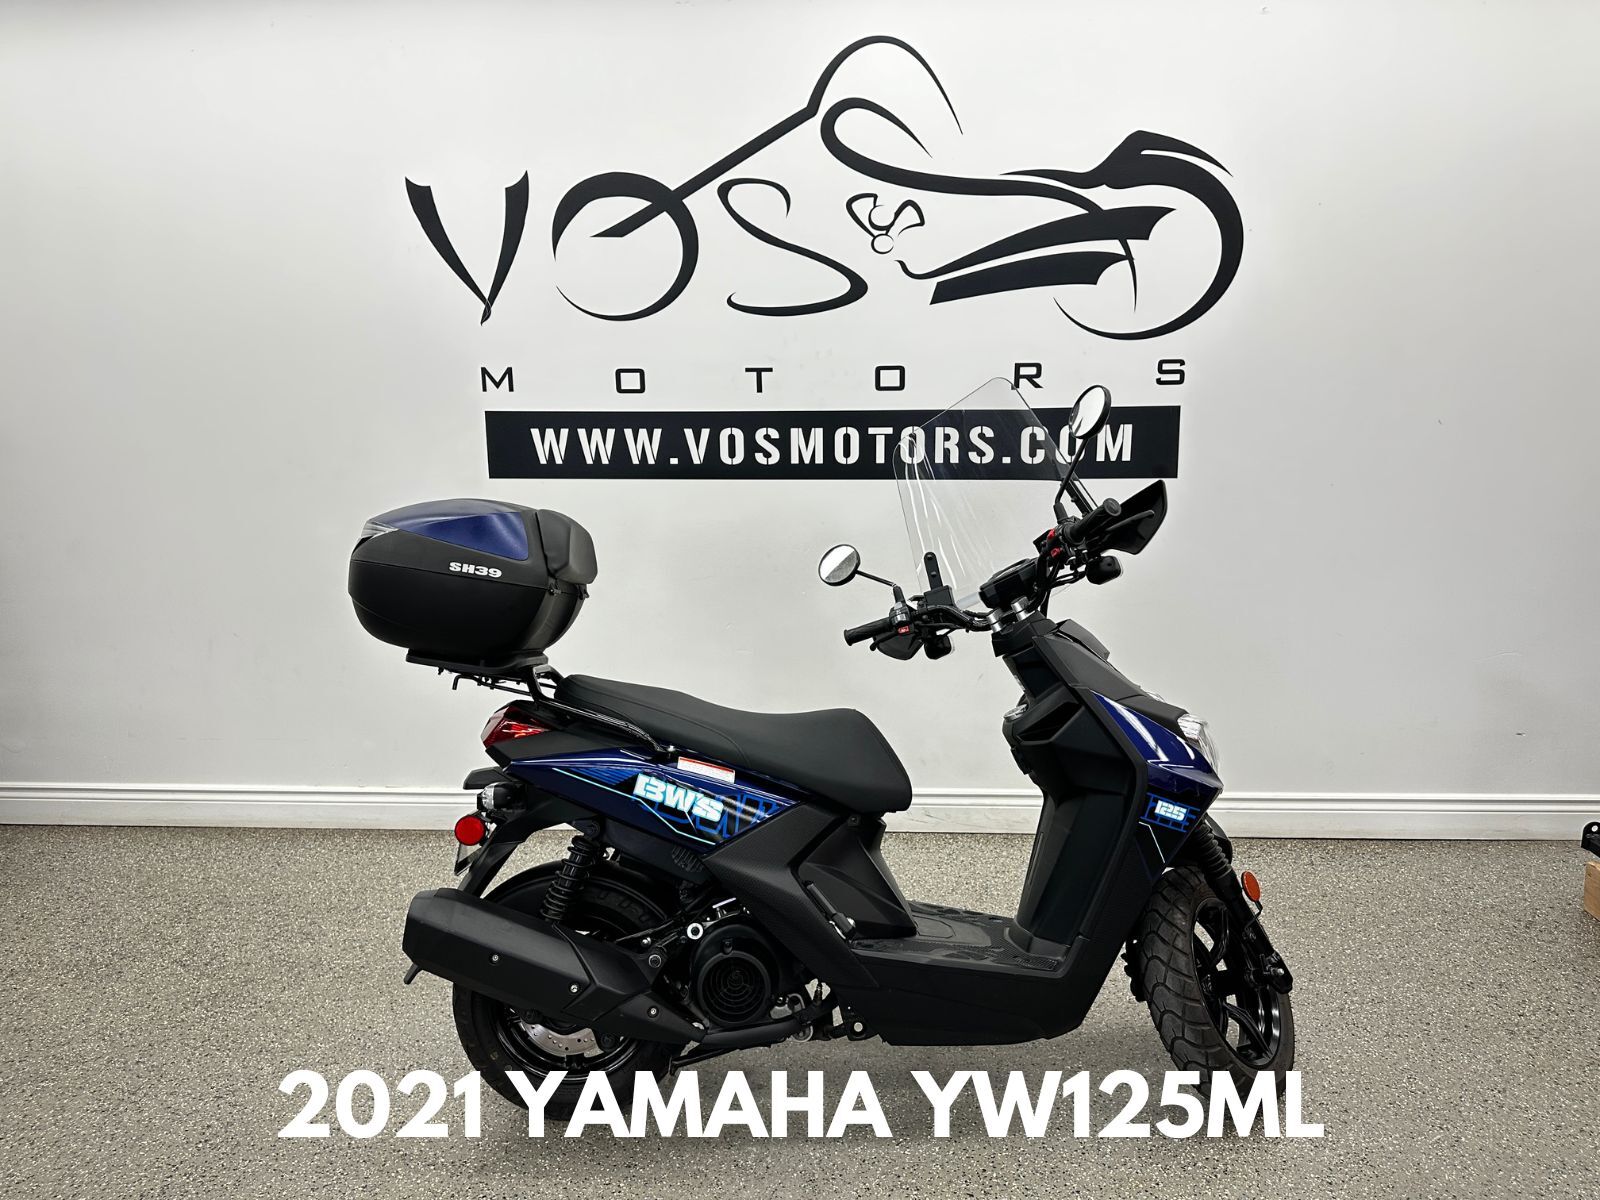 2021 Yamaha YW125ML BWs 125 - V5686 - -No Payments for 1 Year**